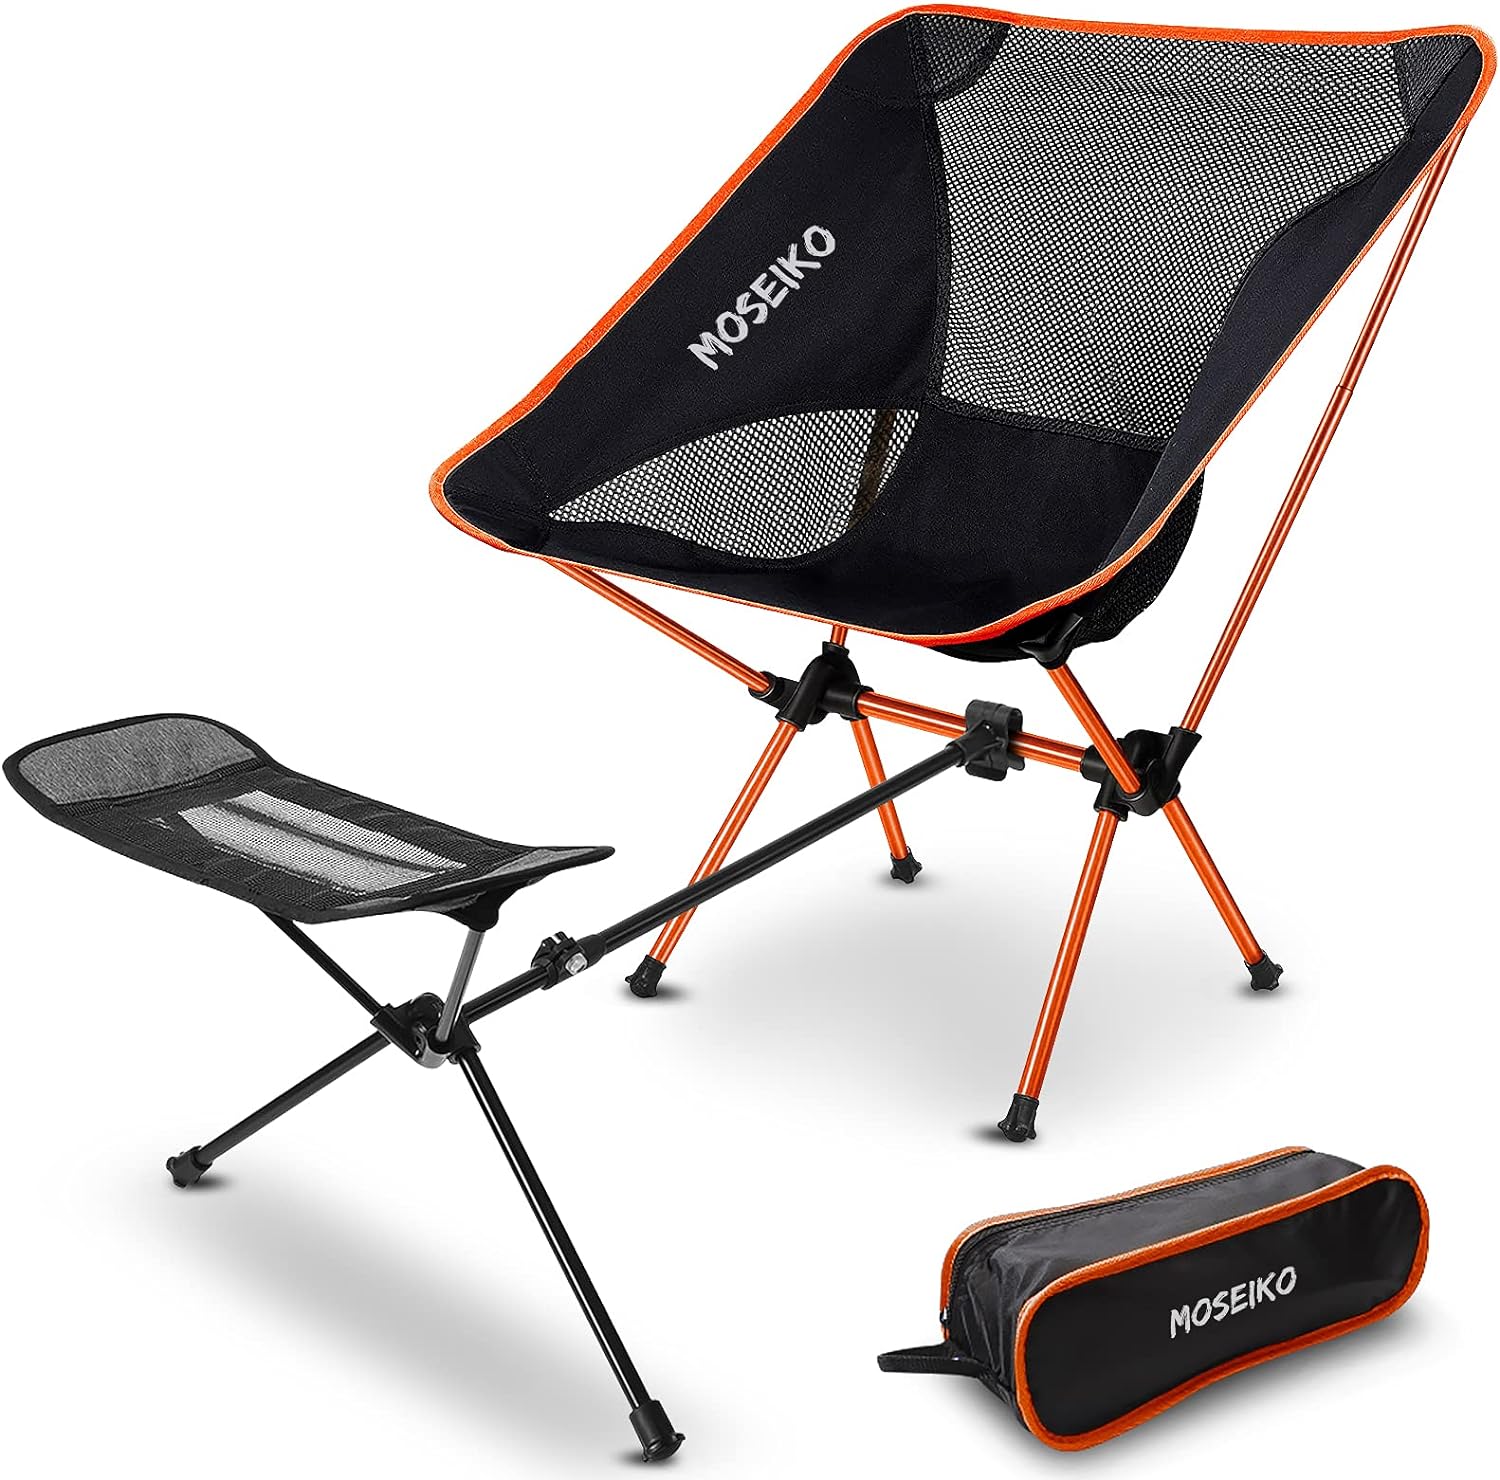 Orange Outdoor Folding Chairs,Camping Chair Ultralight Hiking Portable Compact Backpacking Chair Folding Chairs with Lightweight Carry Bag 